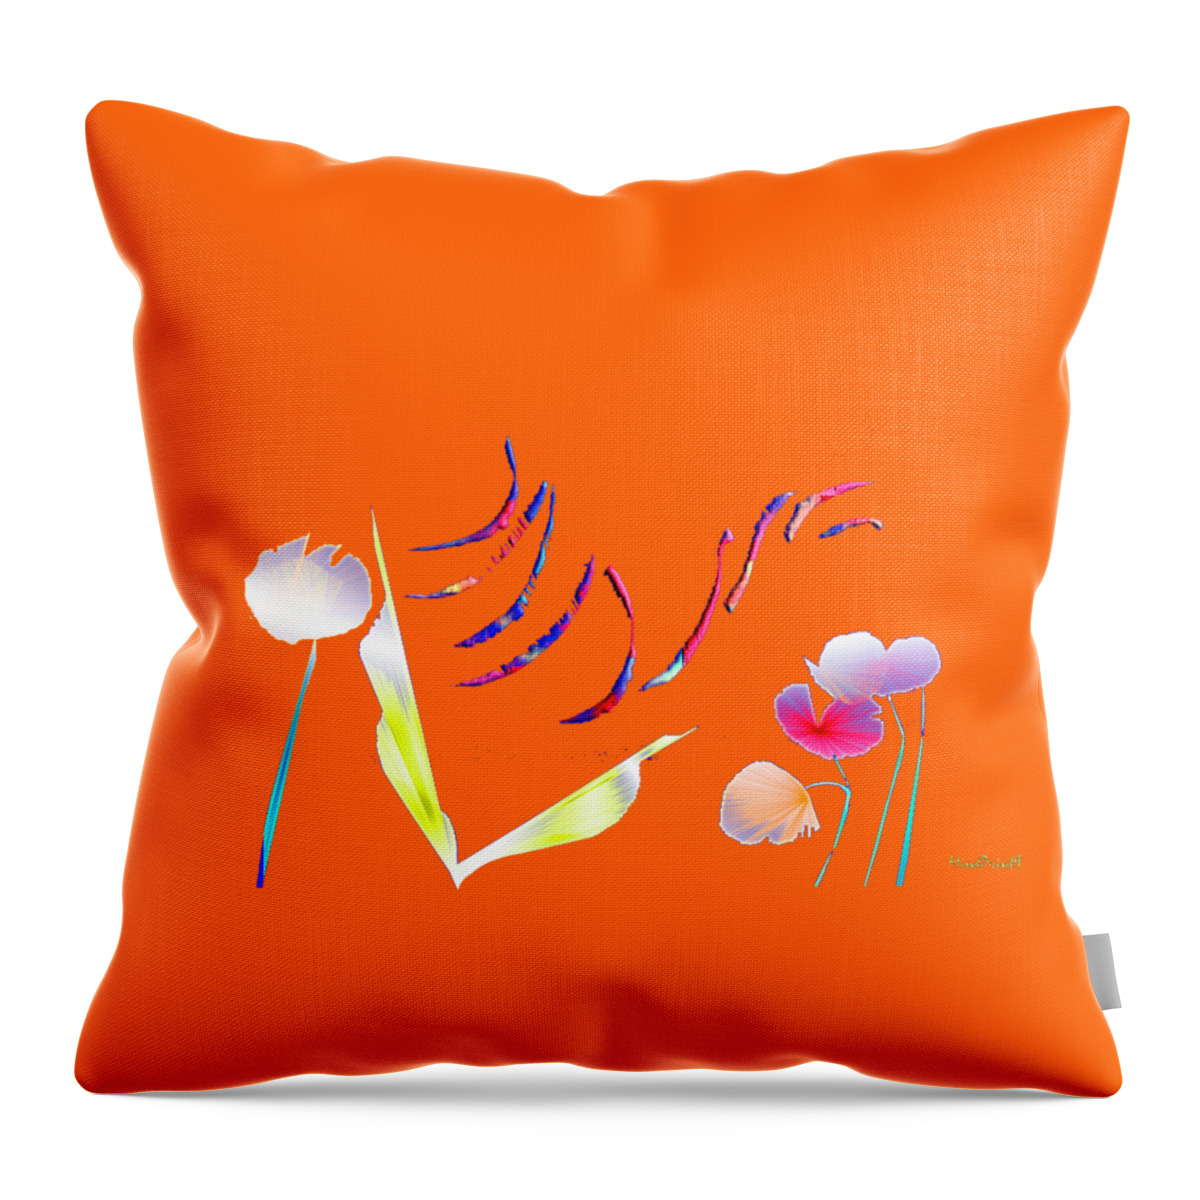 Flowers Throw Pillow featuring the digital art Aqua Flora by Asok Mukhopadhyay